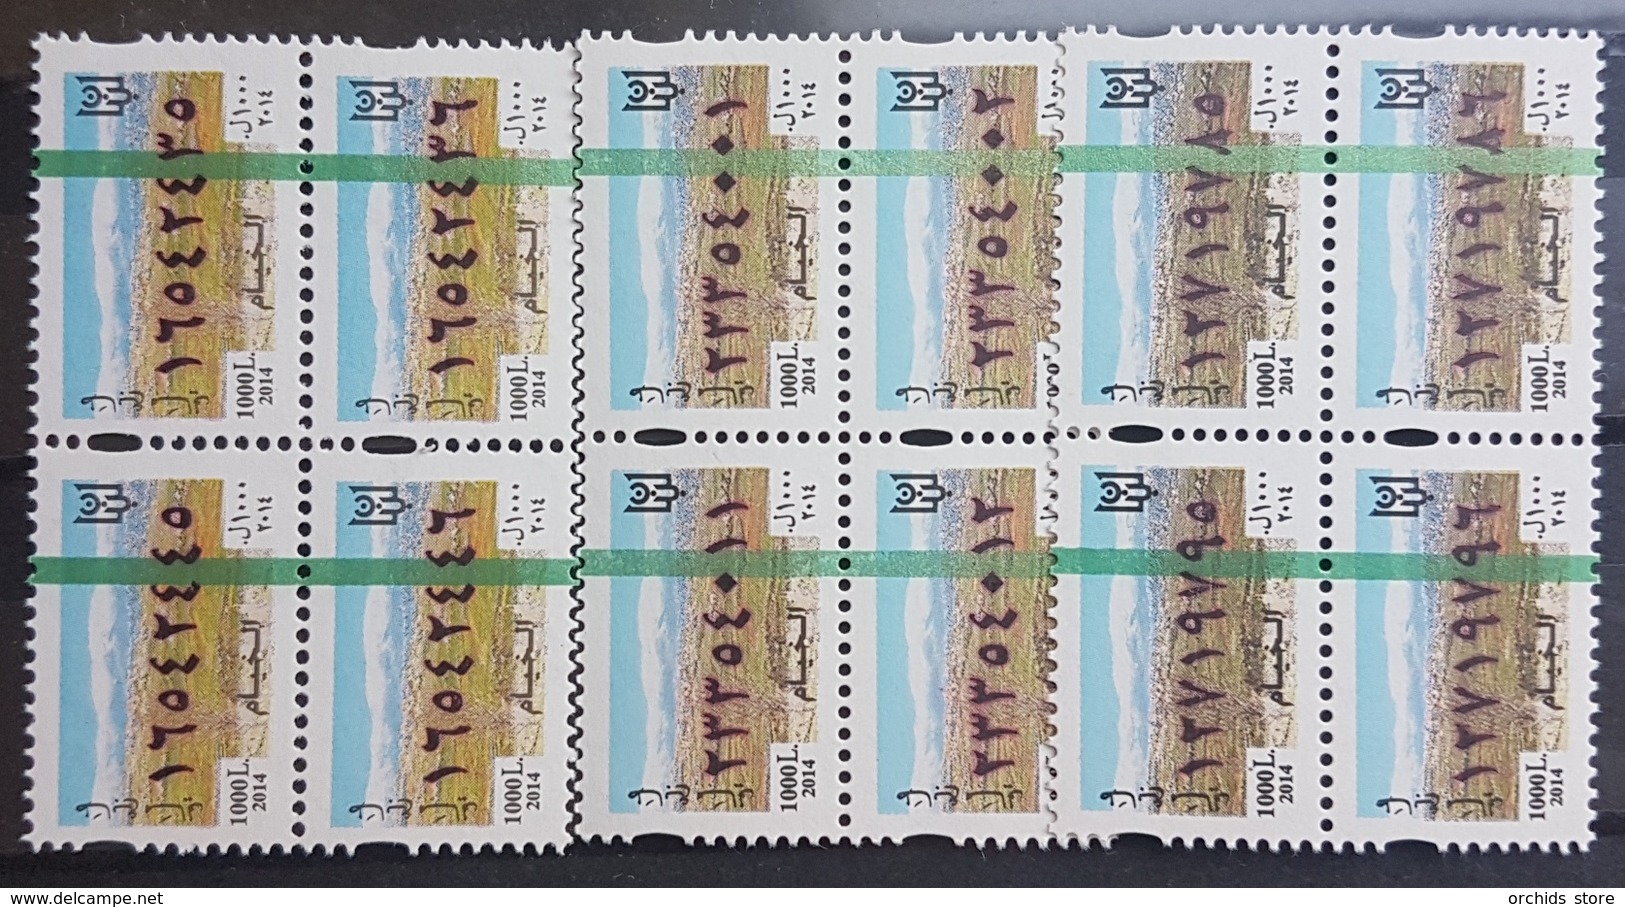 Lebanon 2014 MNH Fiscal Revenue Stamp - 1000L - Al Khyam All Three Issues (Varieties In Colours) - Blks/4 - Lebanon